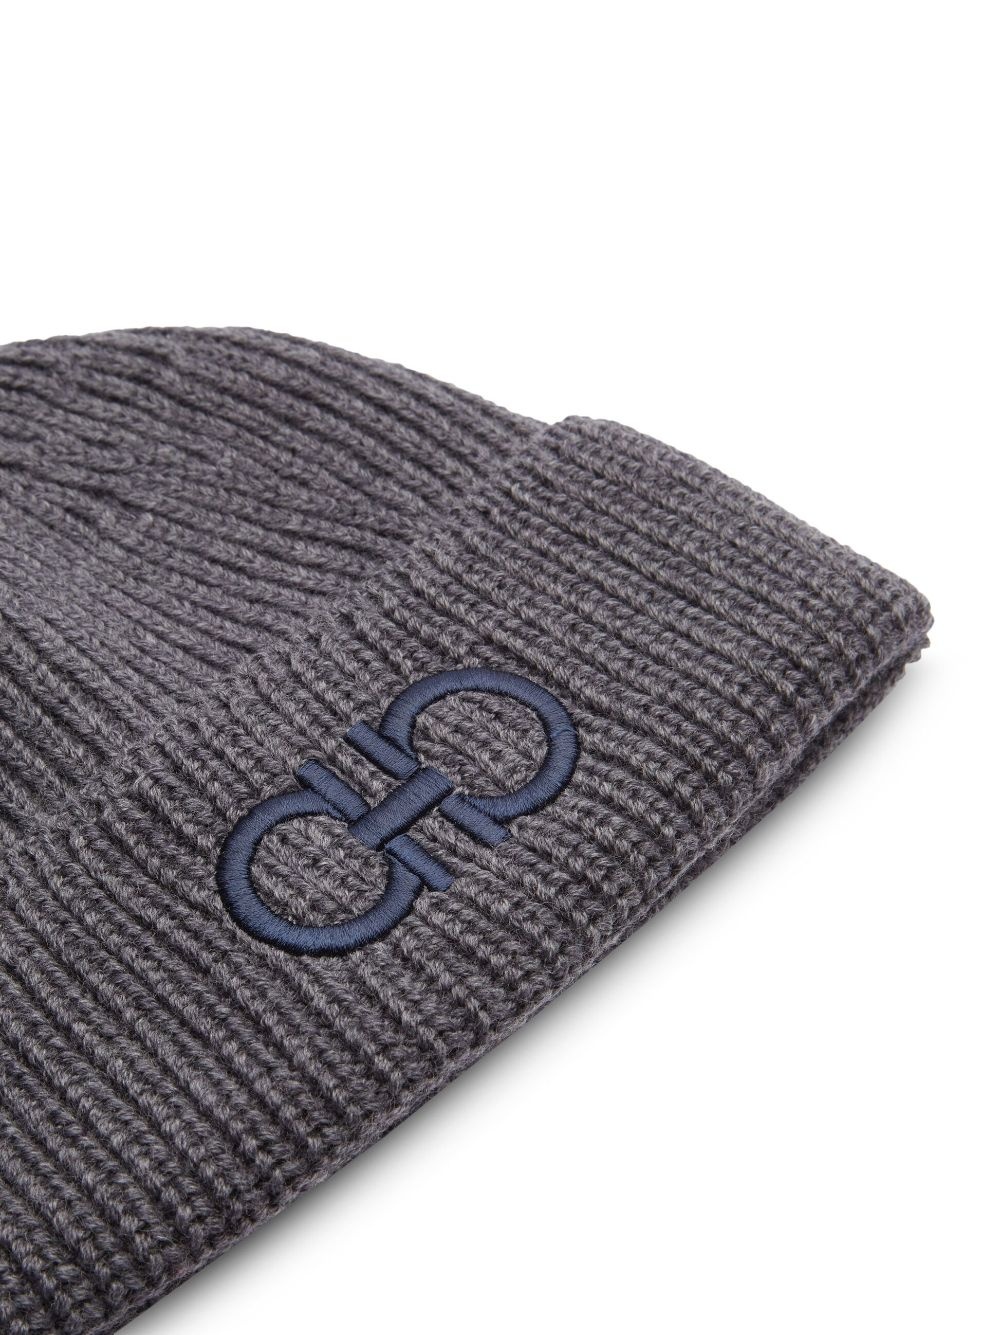 embroidered-logo knit wool beanie - 3